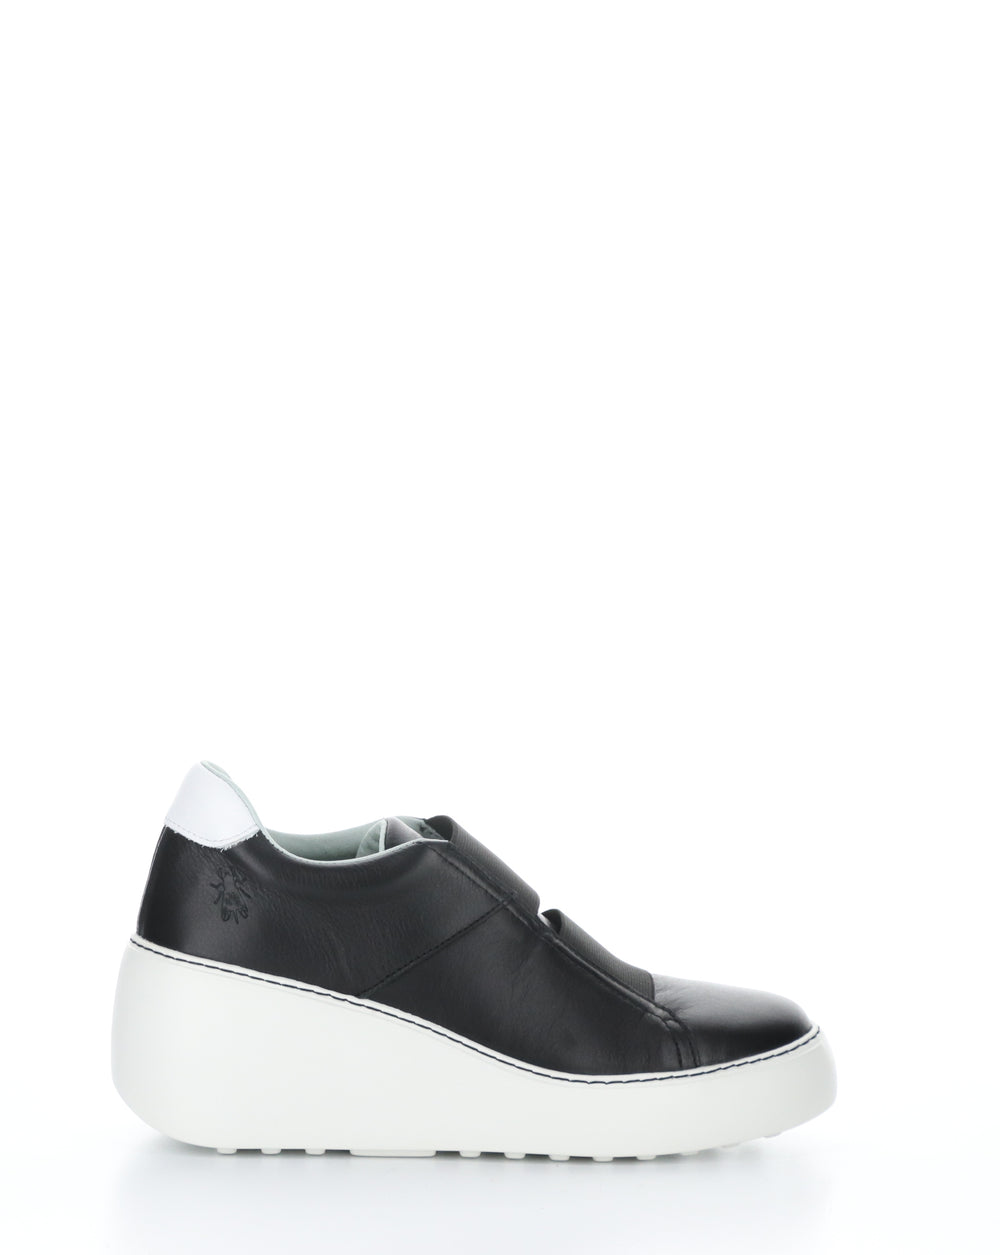 DITO581FLY 000 BLACK Elasticated Shoes